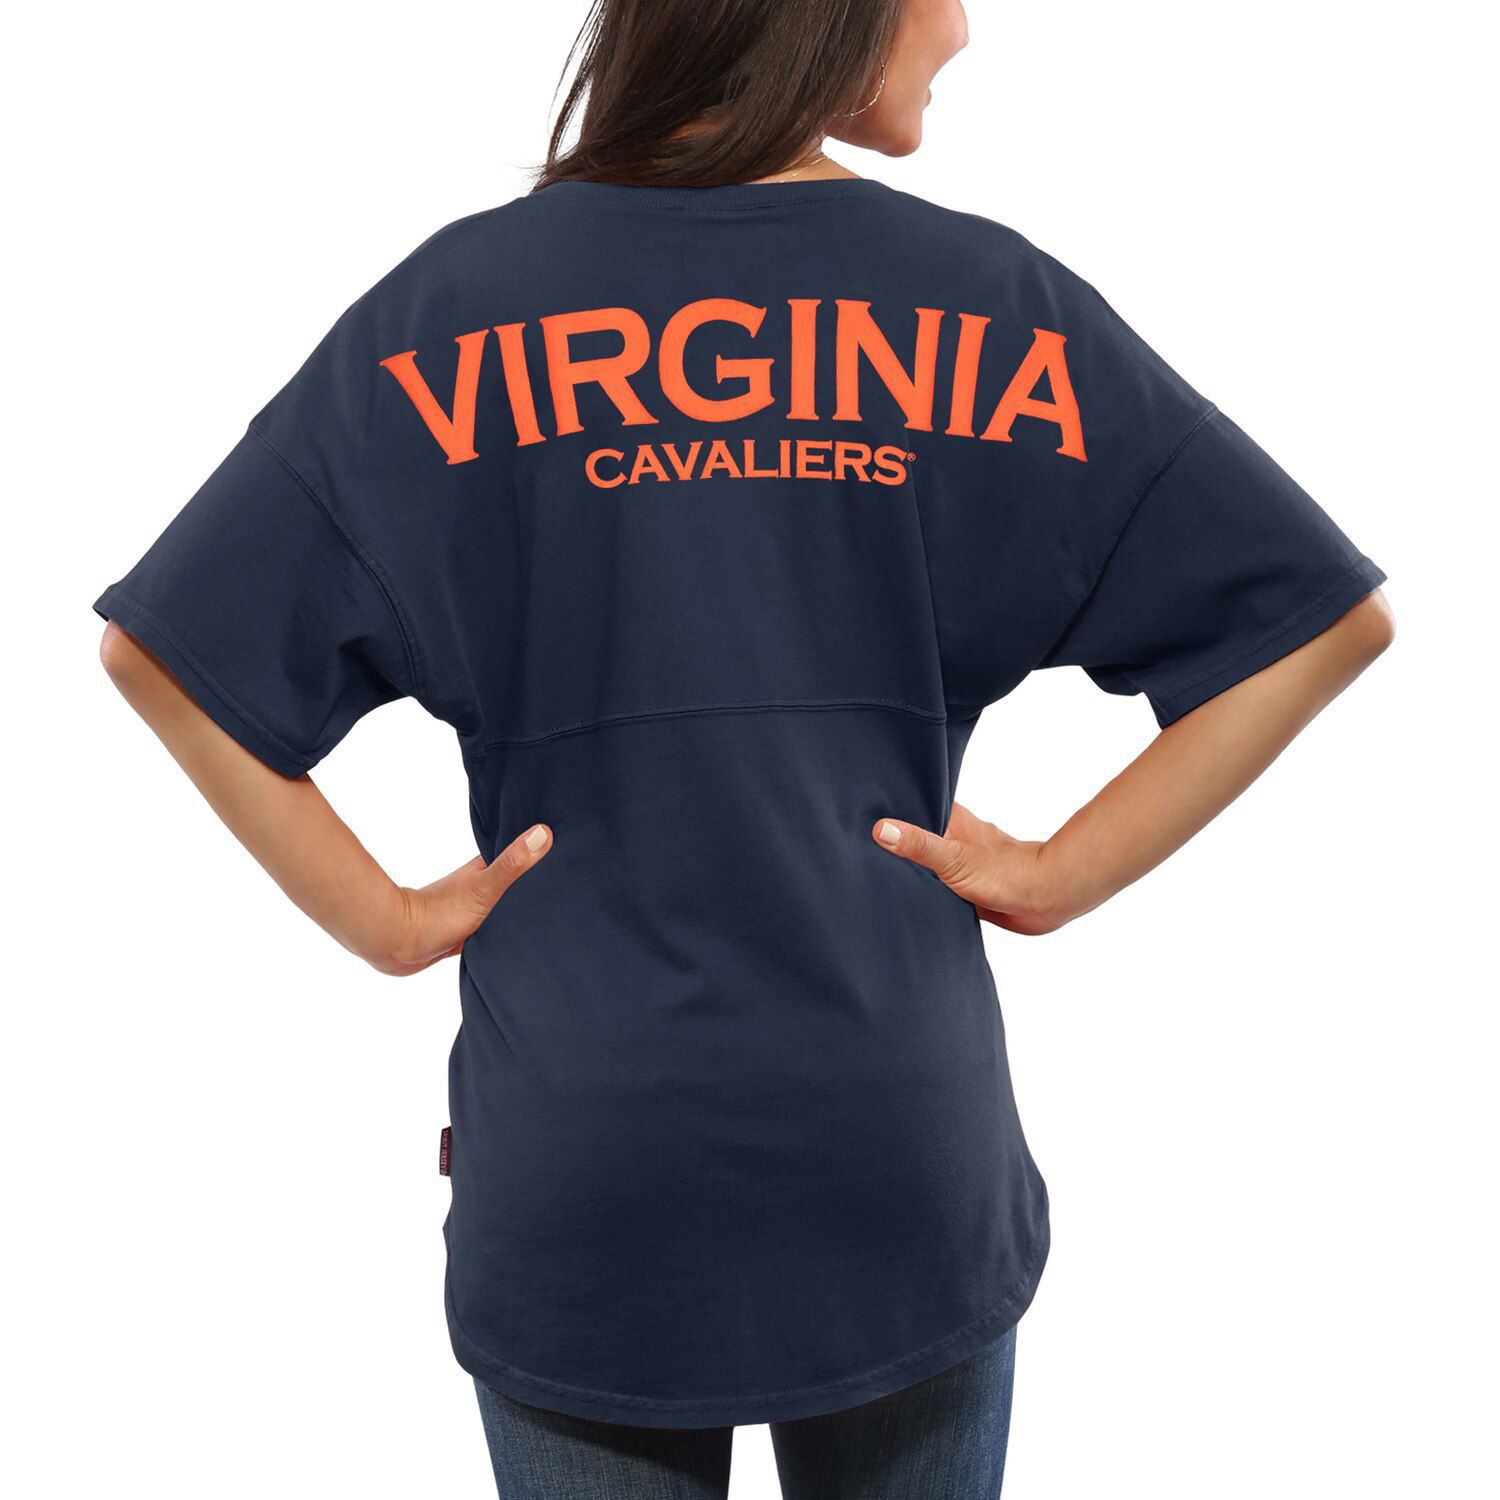 Image for Unbranded Women's Navy Virginia Cavaliers Spirit Jersey Oversized T-Shirt at Kohl's.